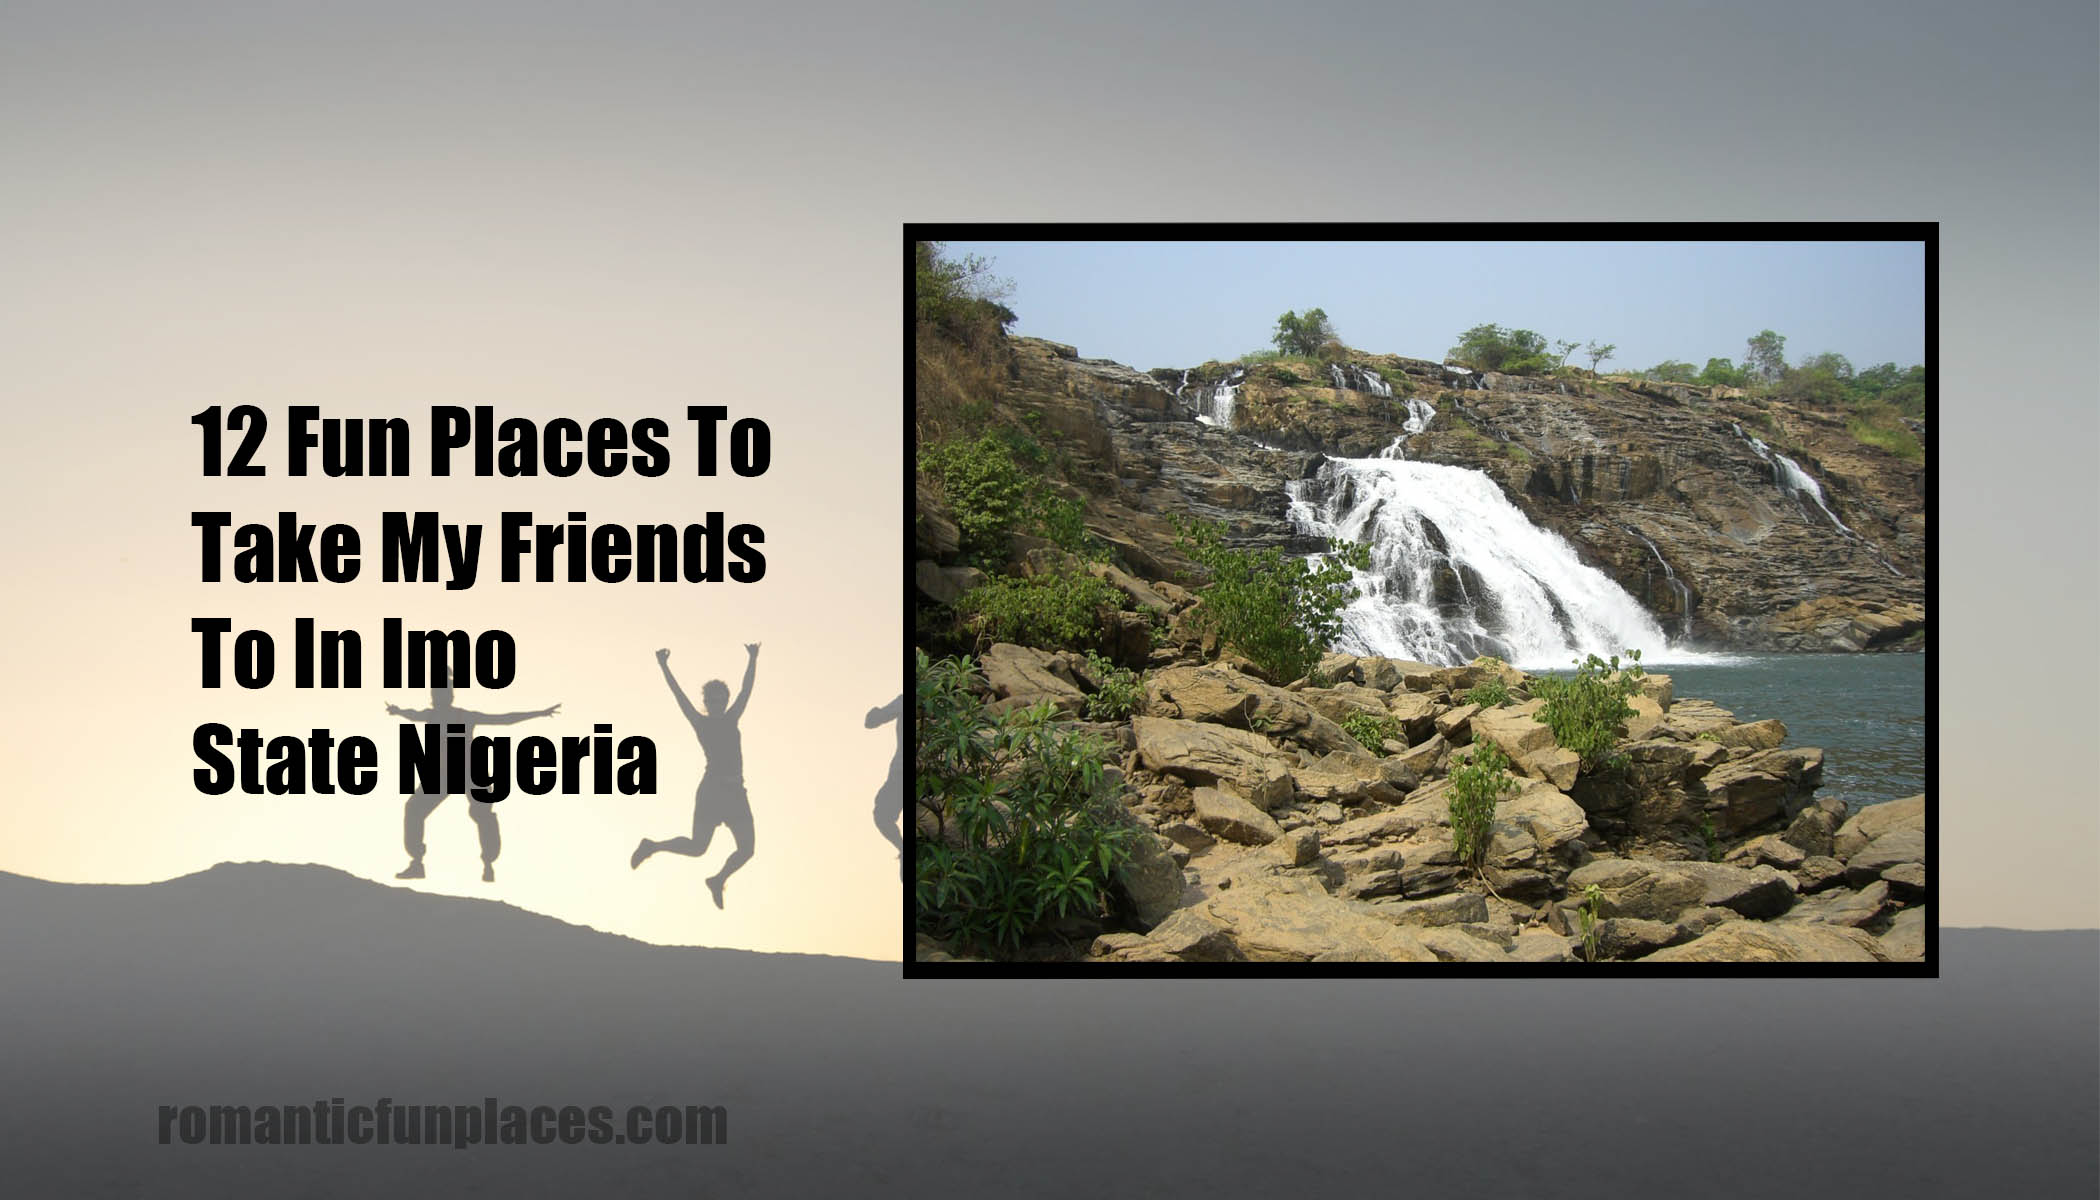 12 Fun Places To Take My Friends To In Imo State Nigeria